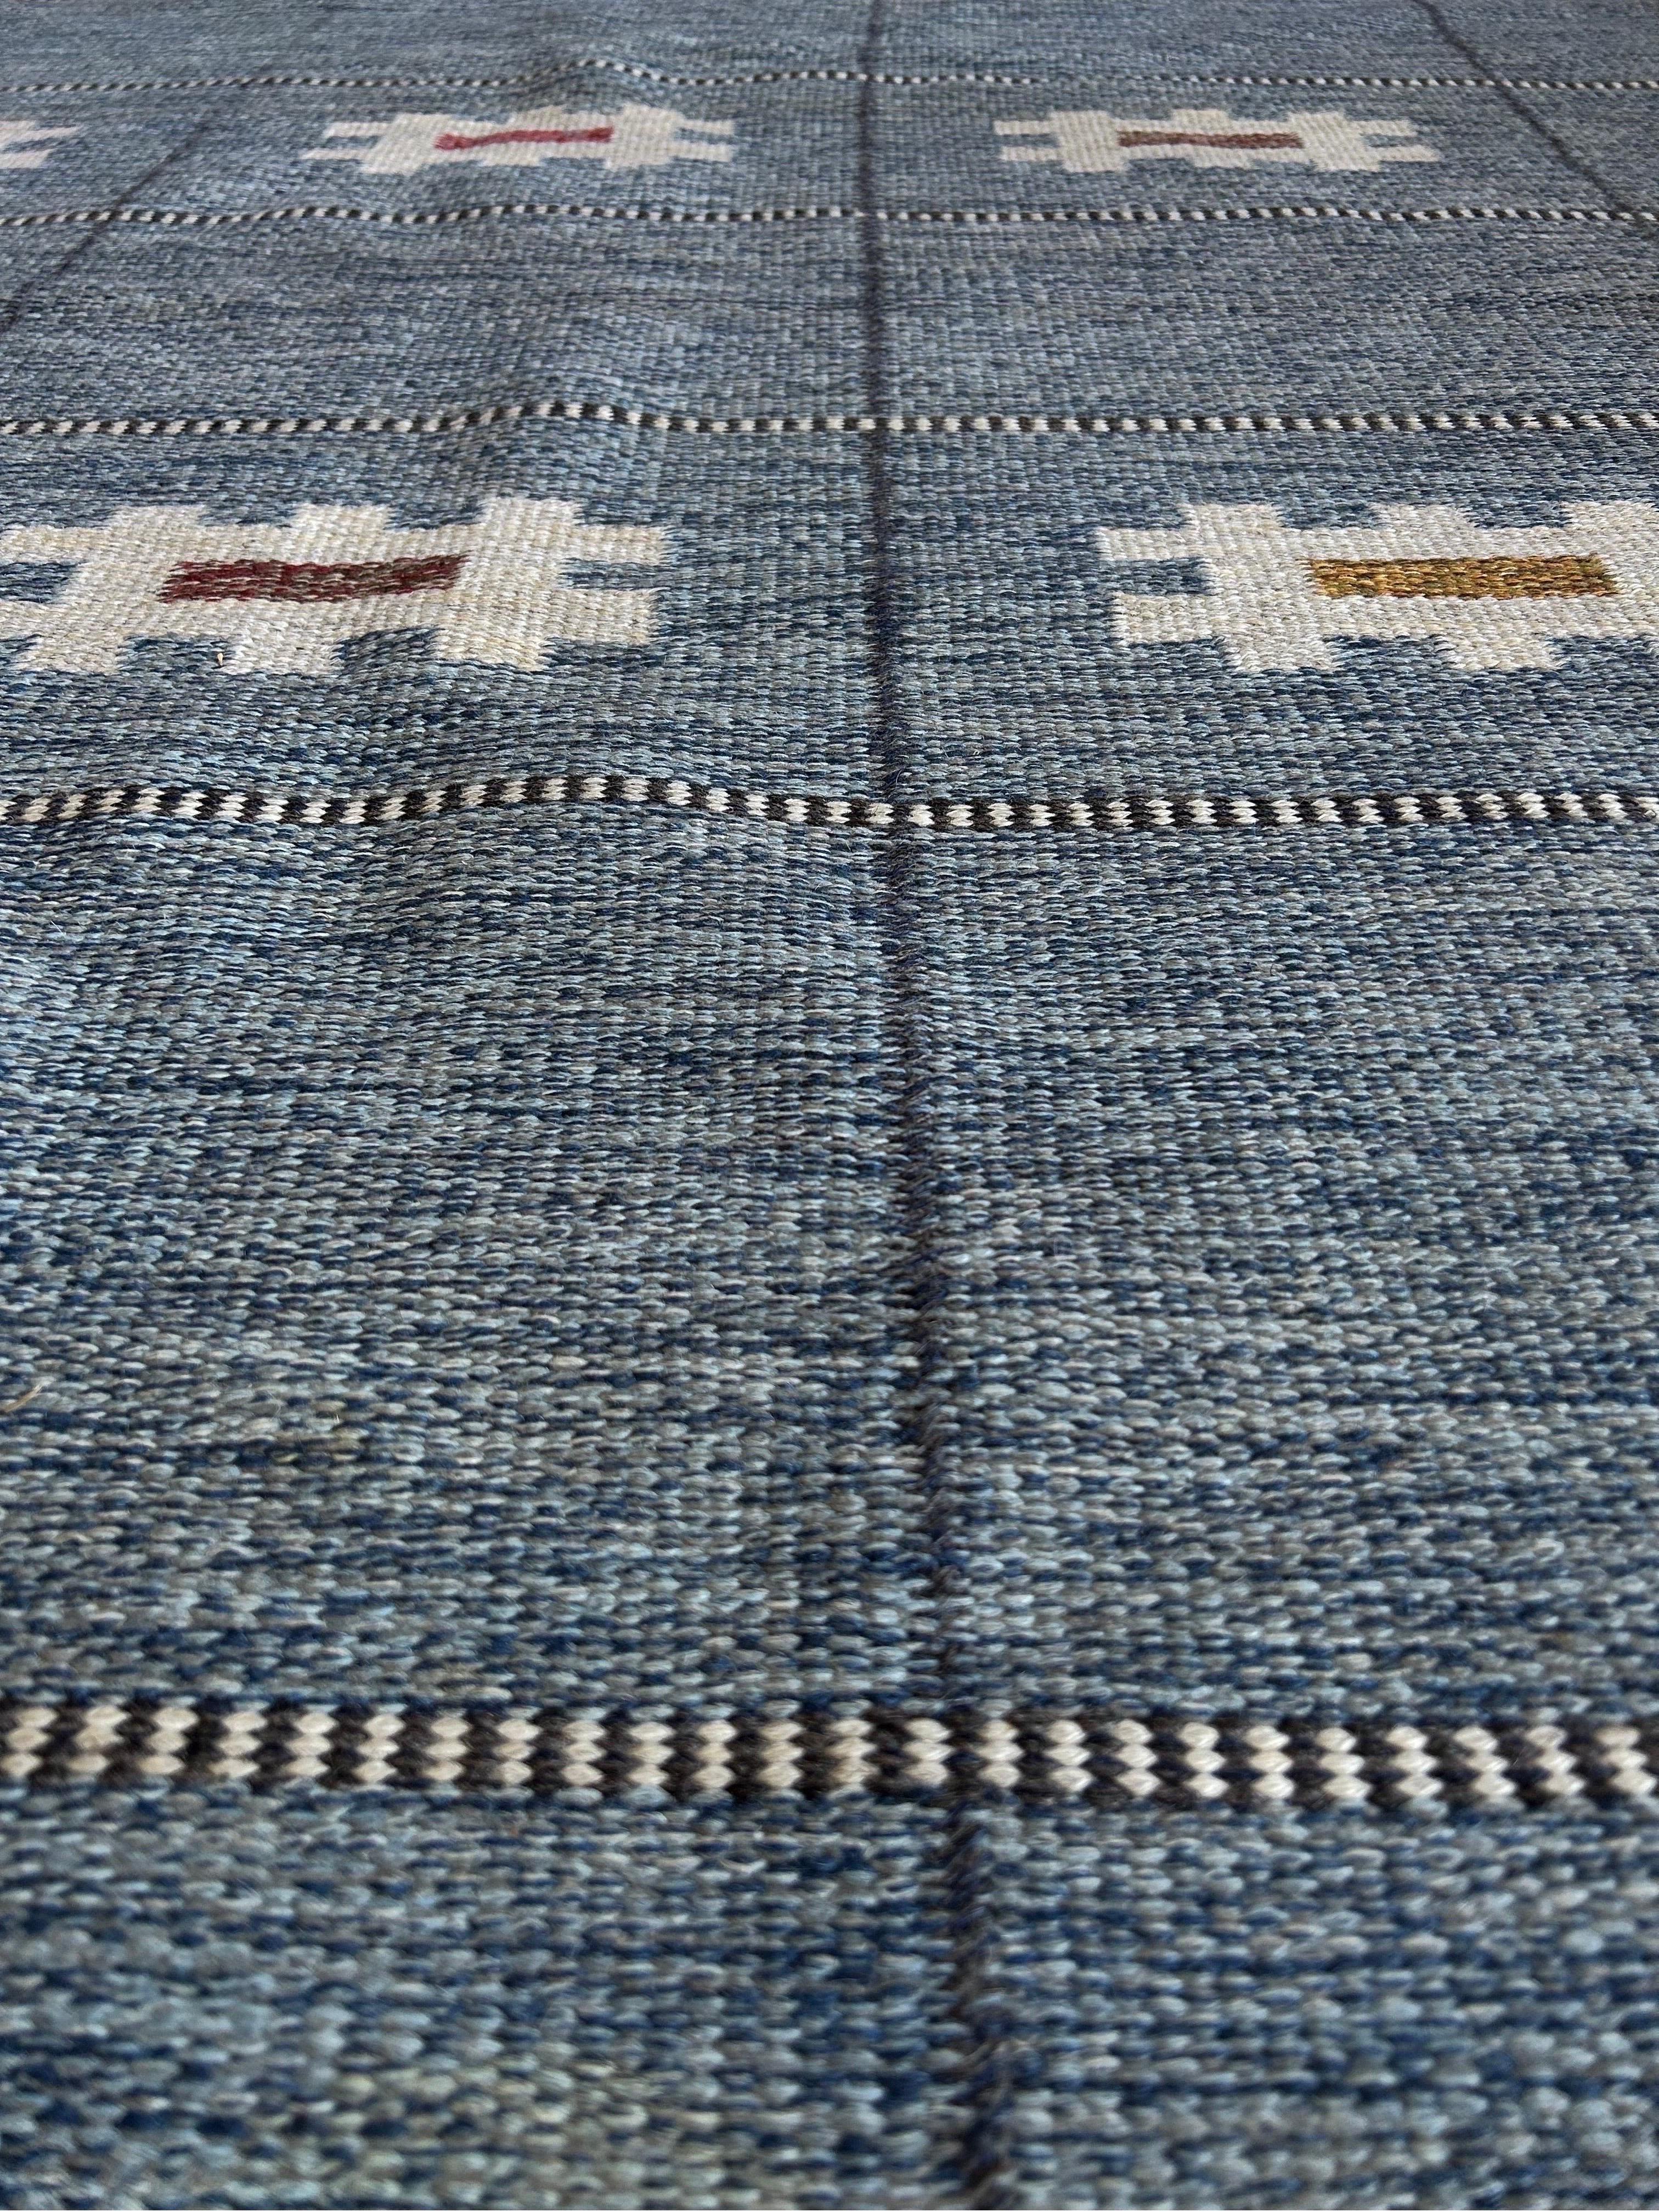 Rare flat weave by swedish designer Rakel Callander designed and made in Sweden in the 1950s.

The flat weave is in good beautiful original condition, the flat weave measures 247 in the height and 163cm in the width.

Carpets and rugs have been